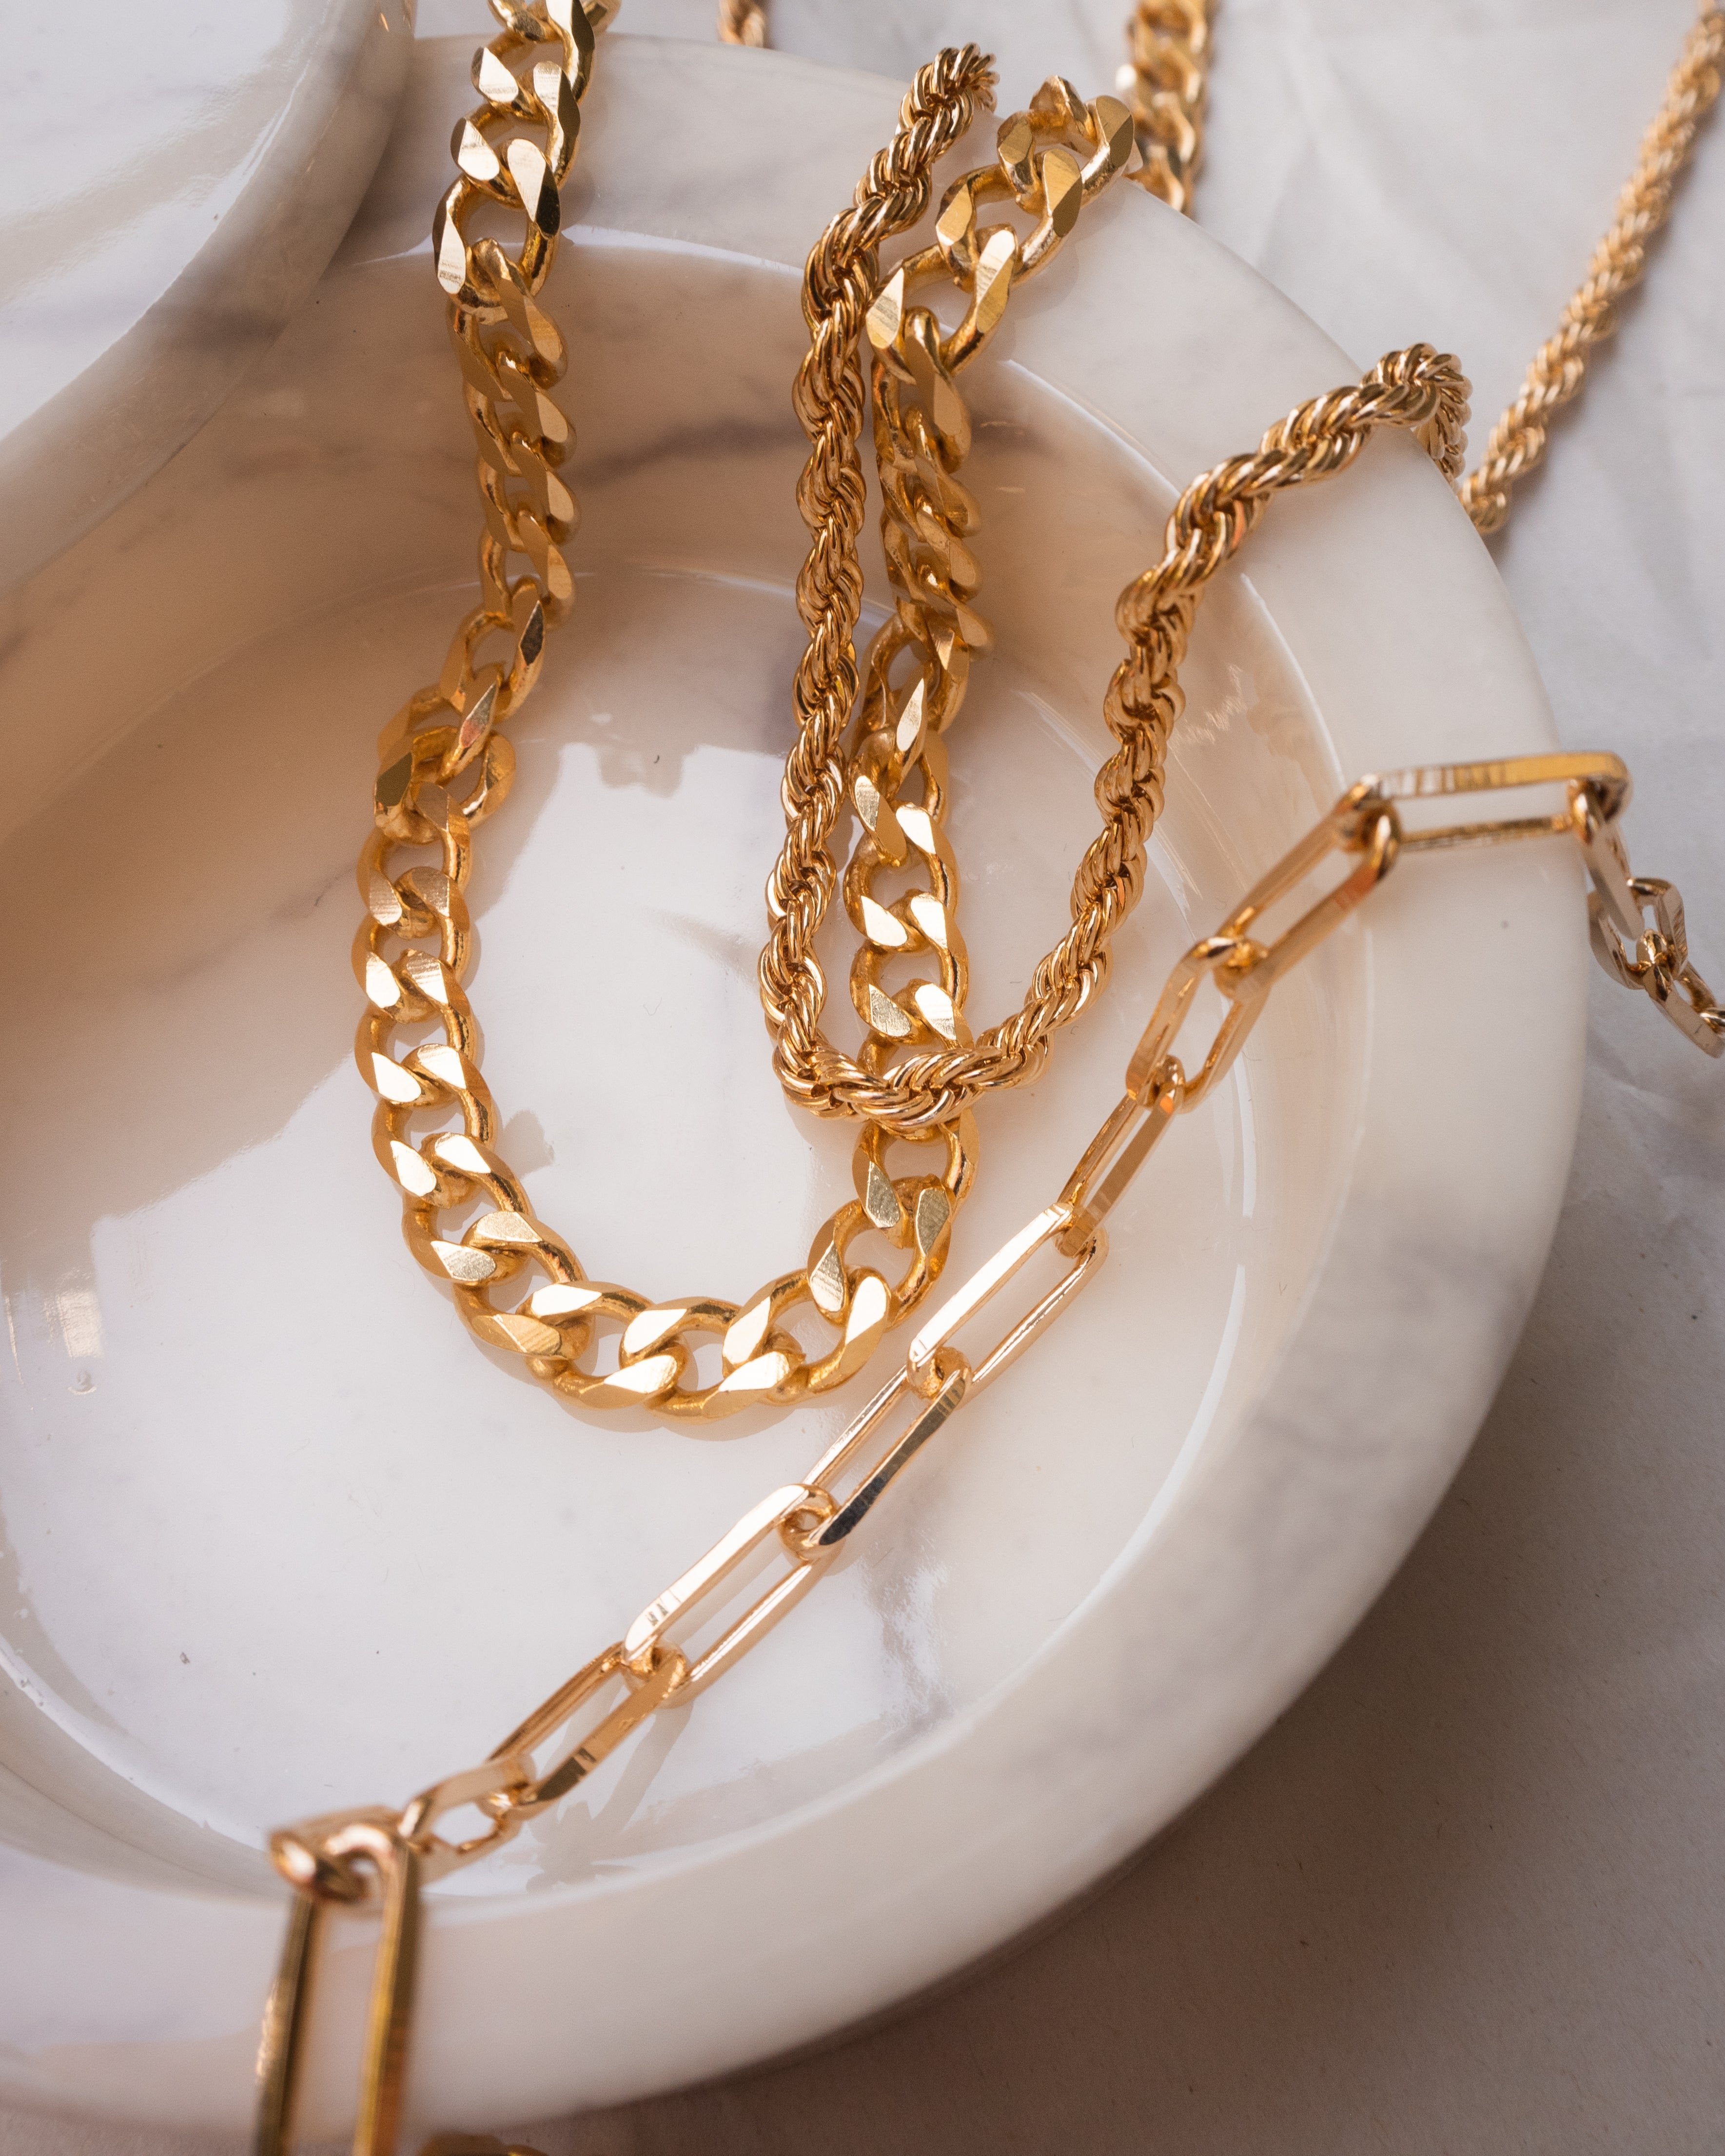 paperclip chain, paperclip necklace, chunky necklace, statement chain, statement necklace, chunky chain, layering chain, layering necklace, statement jewelry, layering chain, gold chain, dainty chain, dainty necklace, gold filled necklace, gold chain